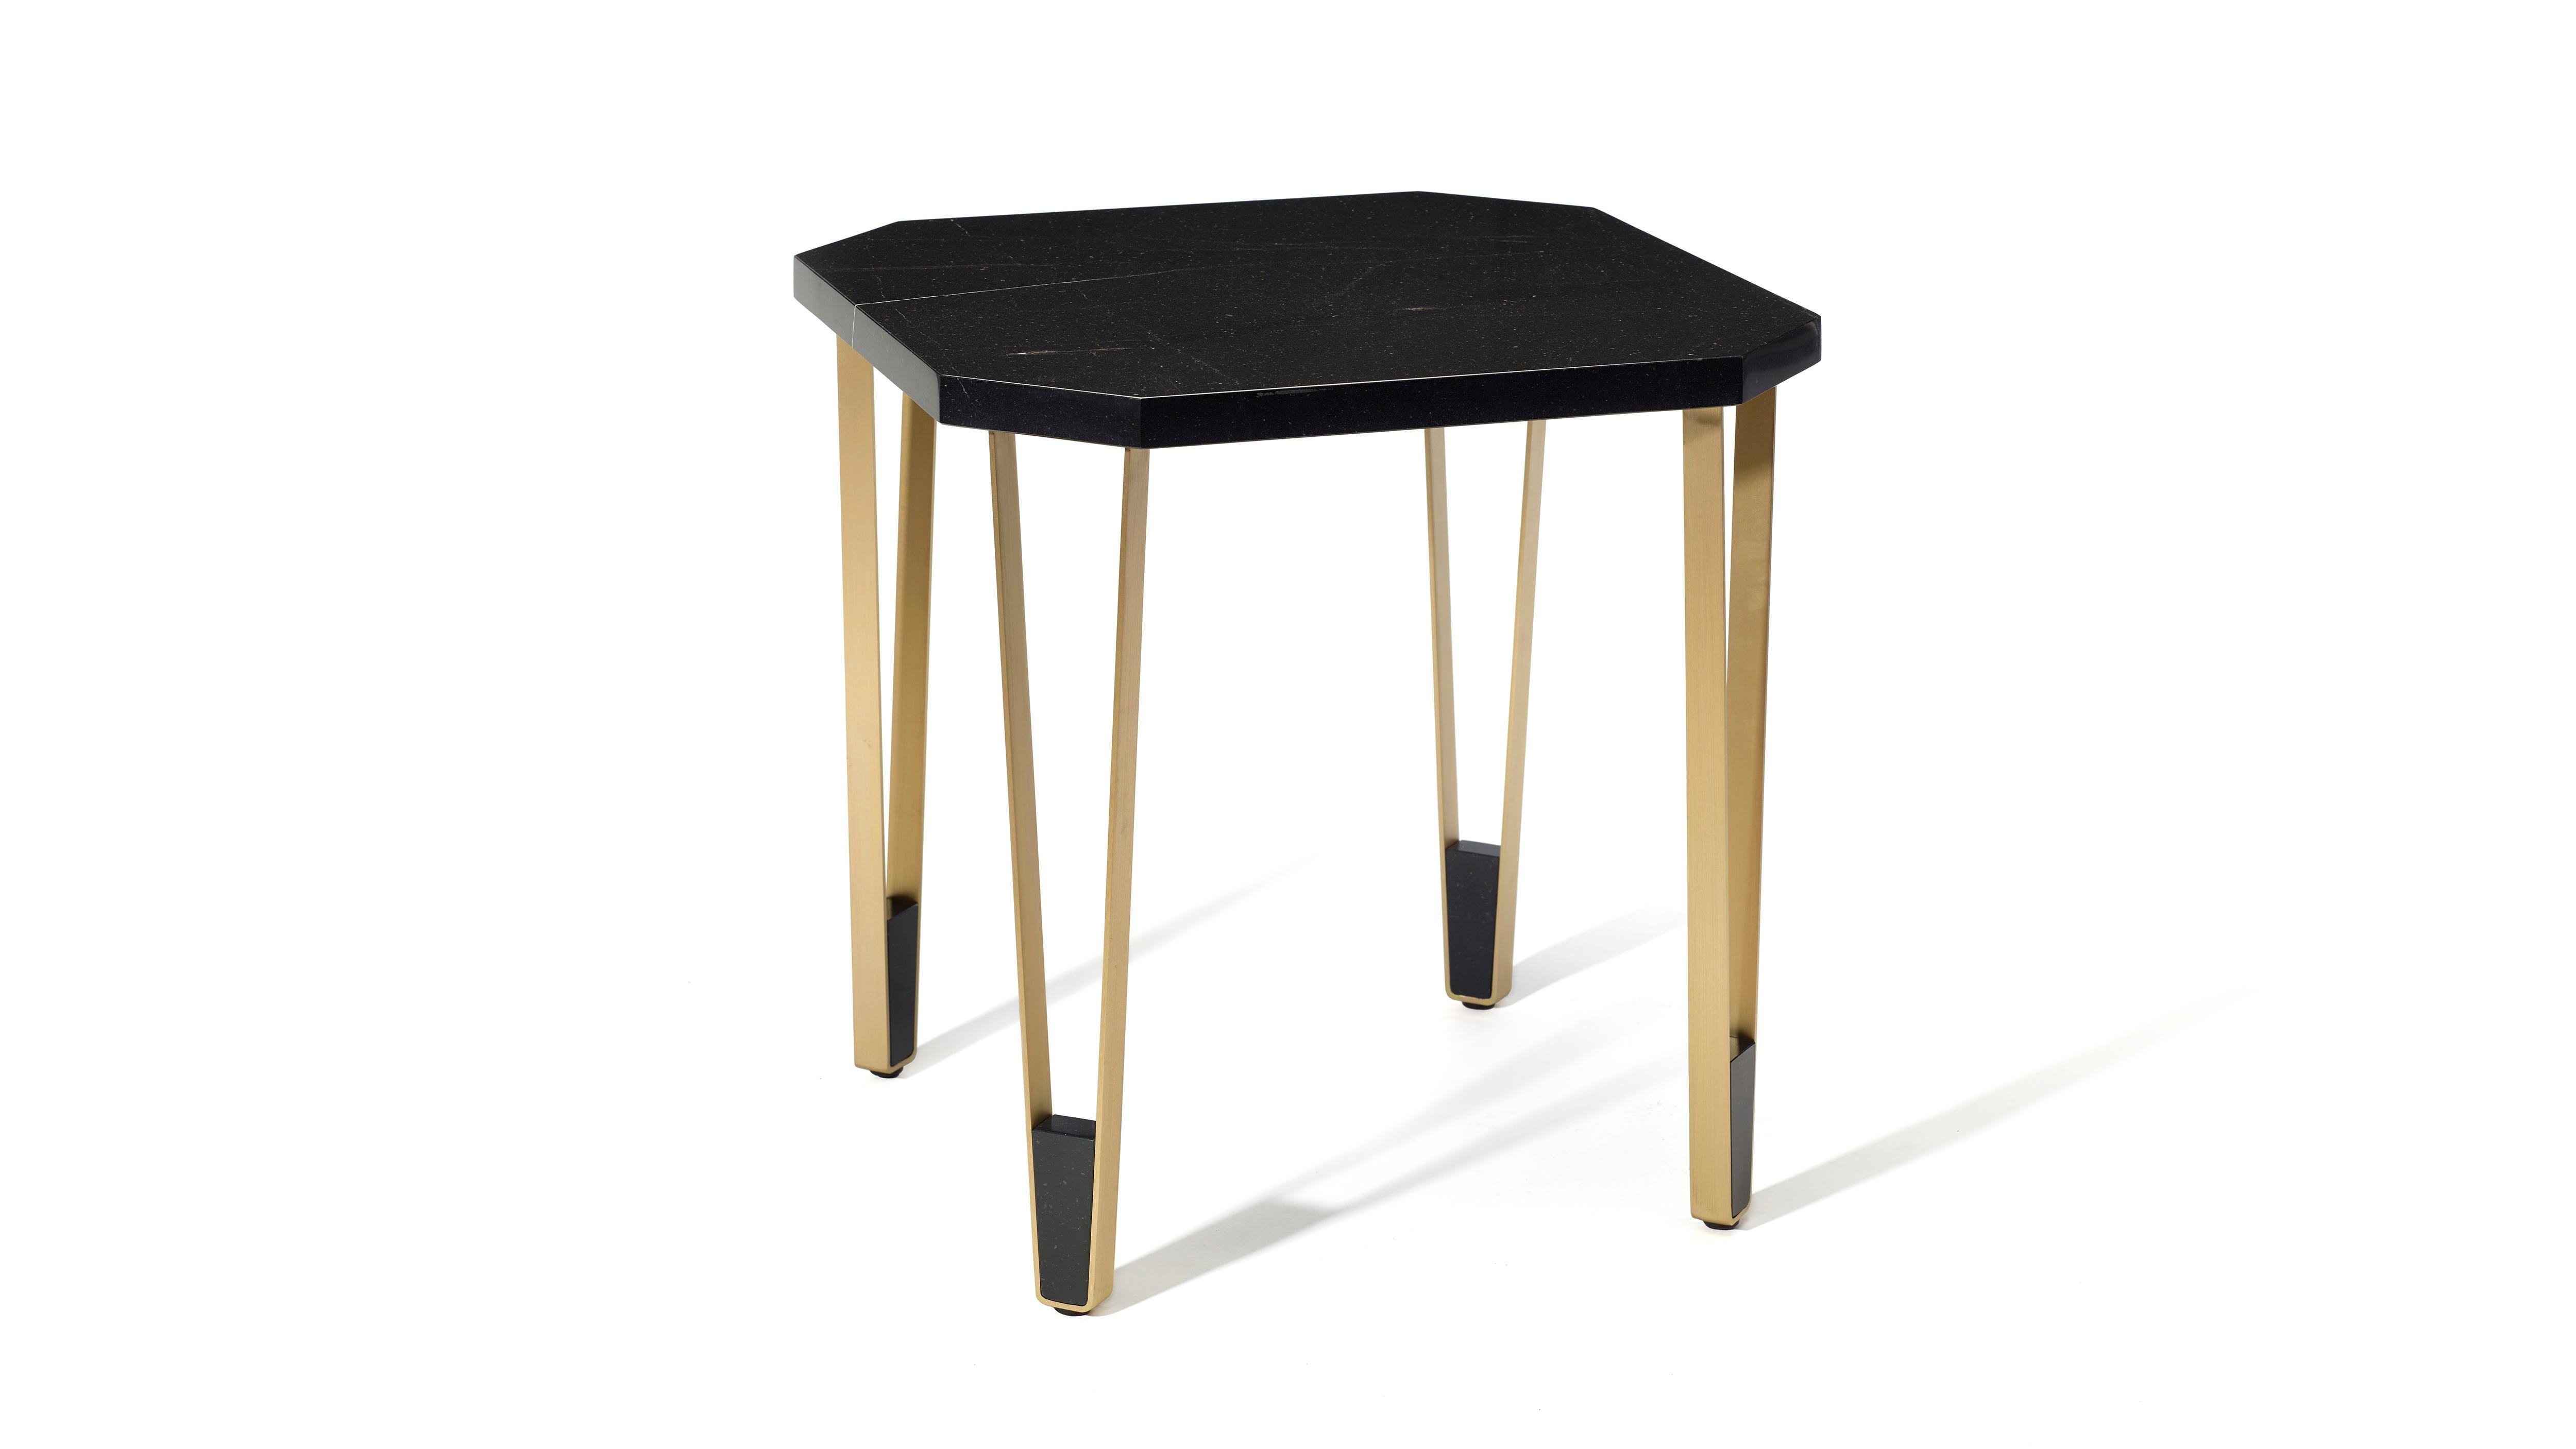 Ionic Square Nero Marquina Marble Side Table by InsidherLand
Dimensions: D 55 x H 55 cm.
Materials: Nero marquina marble, brushed brass.
29 kg.
Other materials available.

Ionic is one of the three orders of classical architecture developed at the